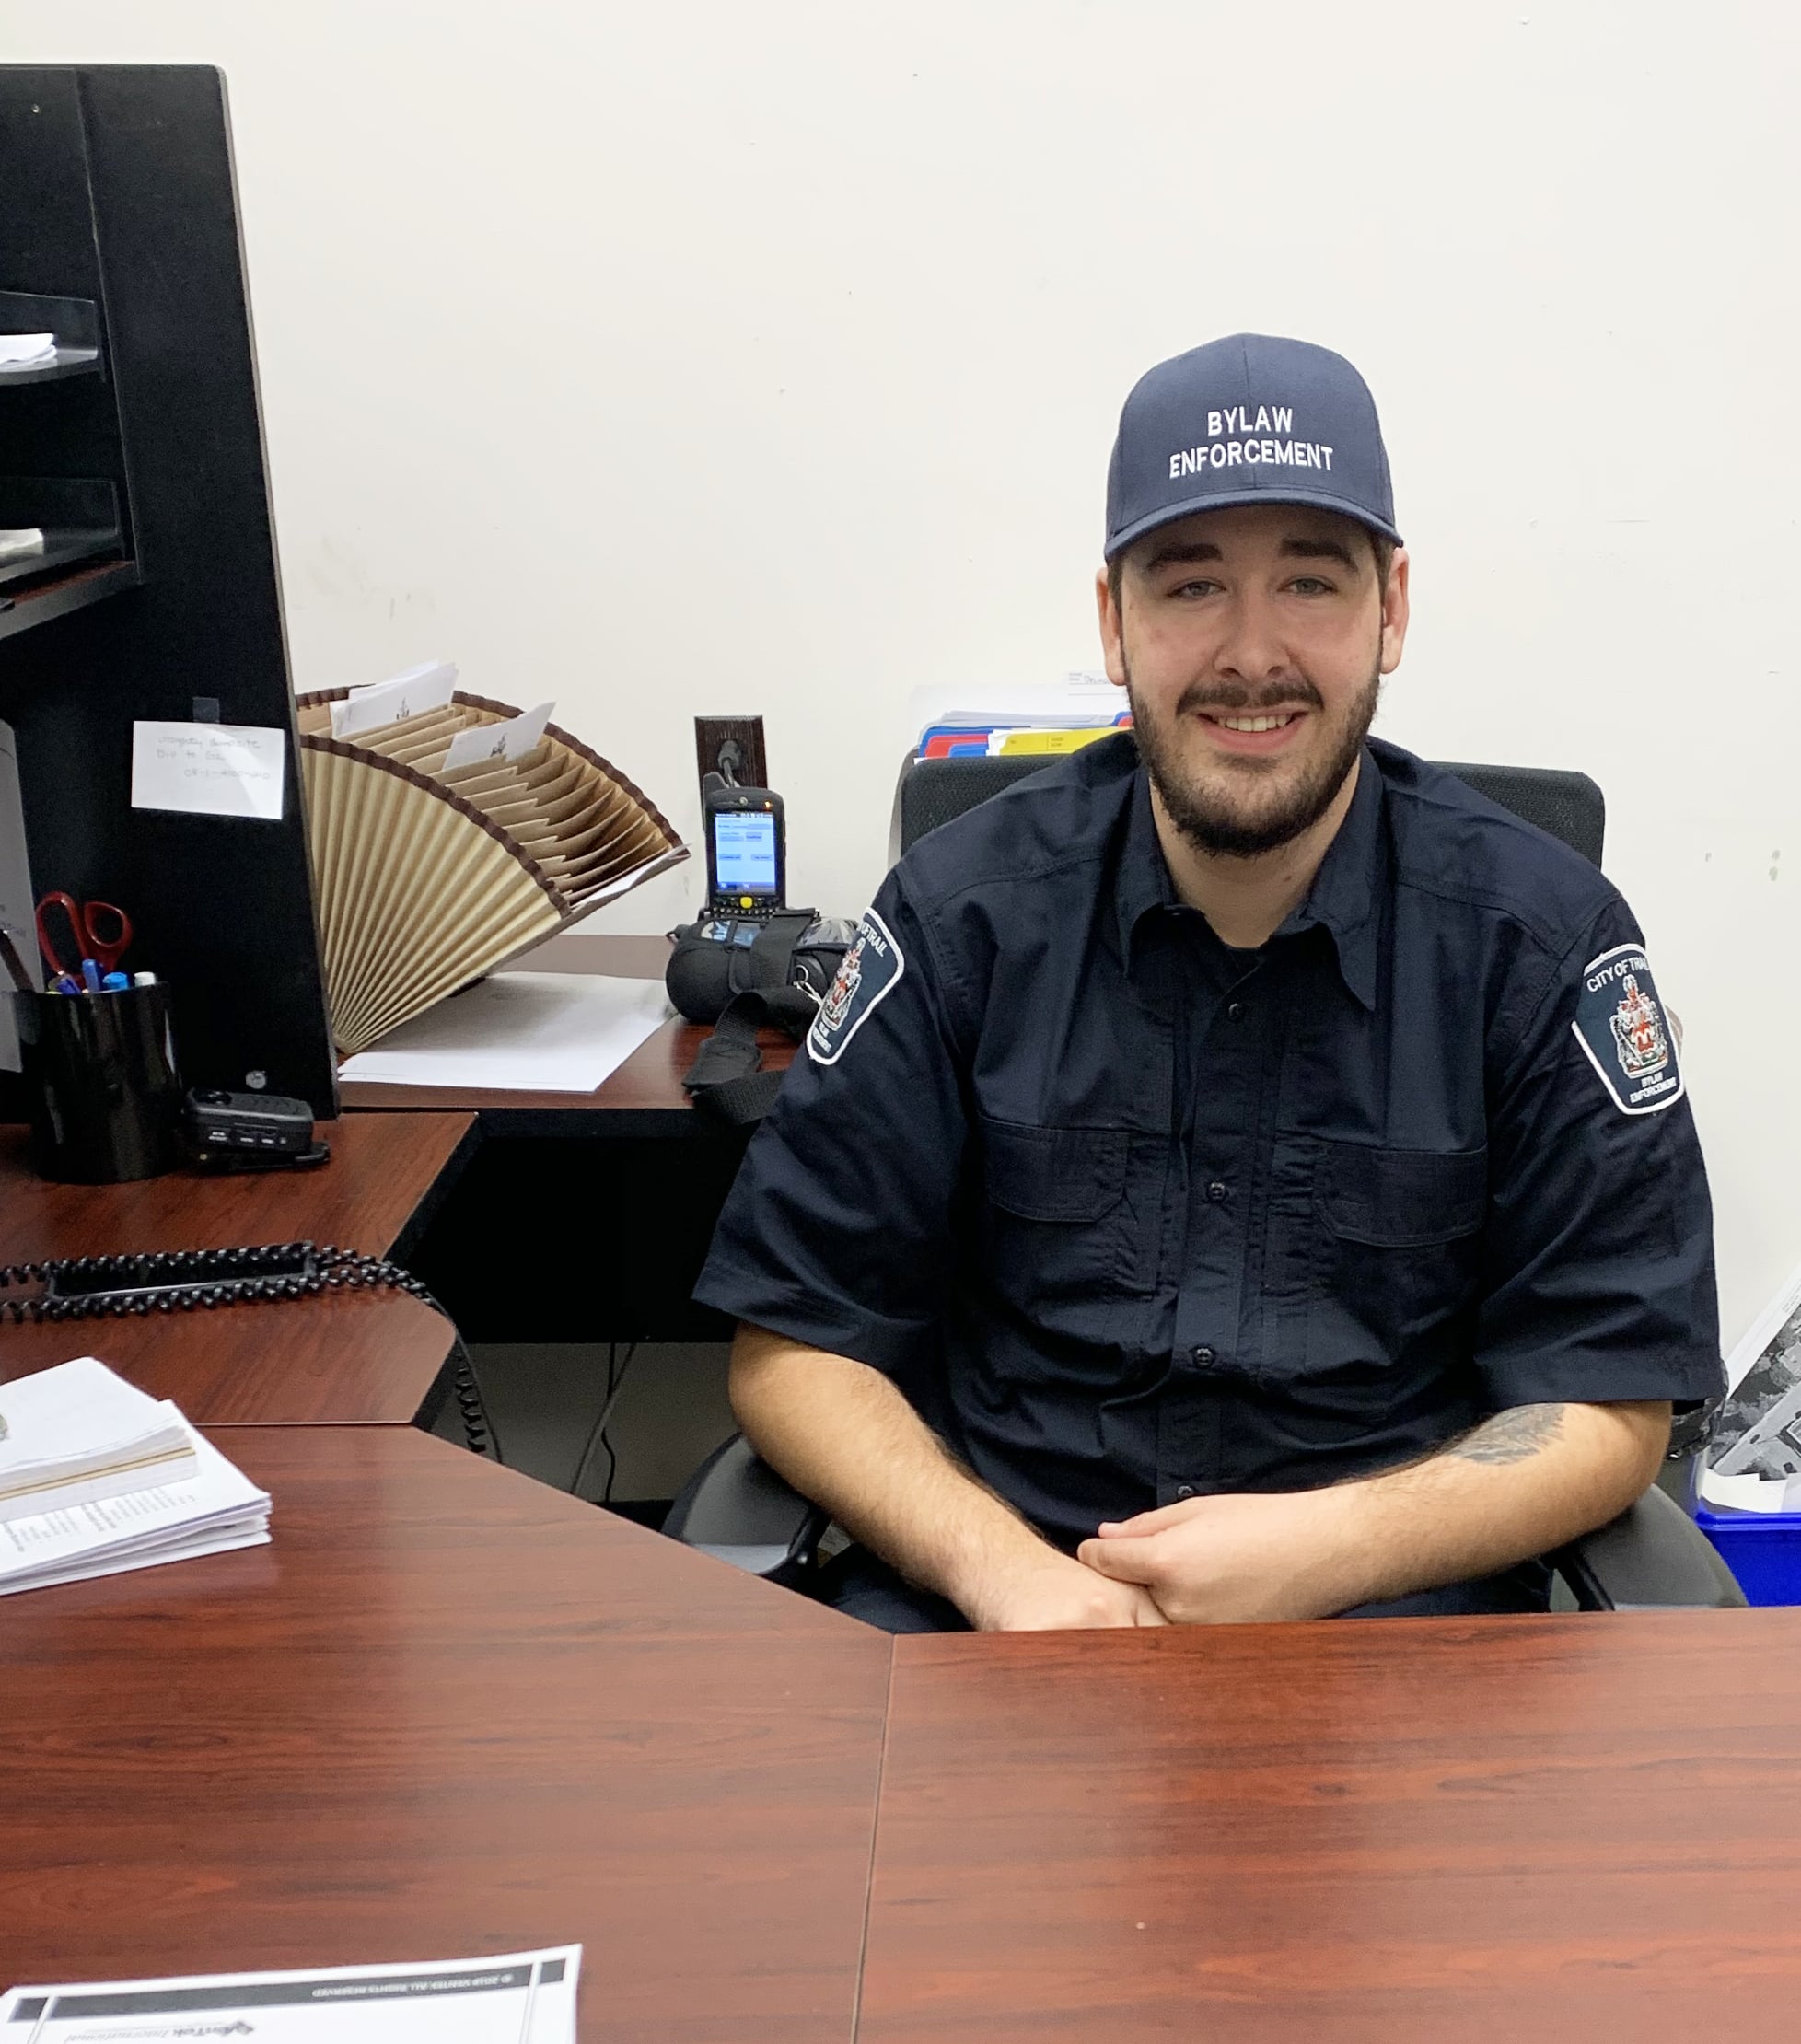 New Bylaw Enforcement Officer Joins City of Trail Team